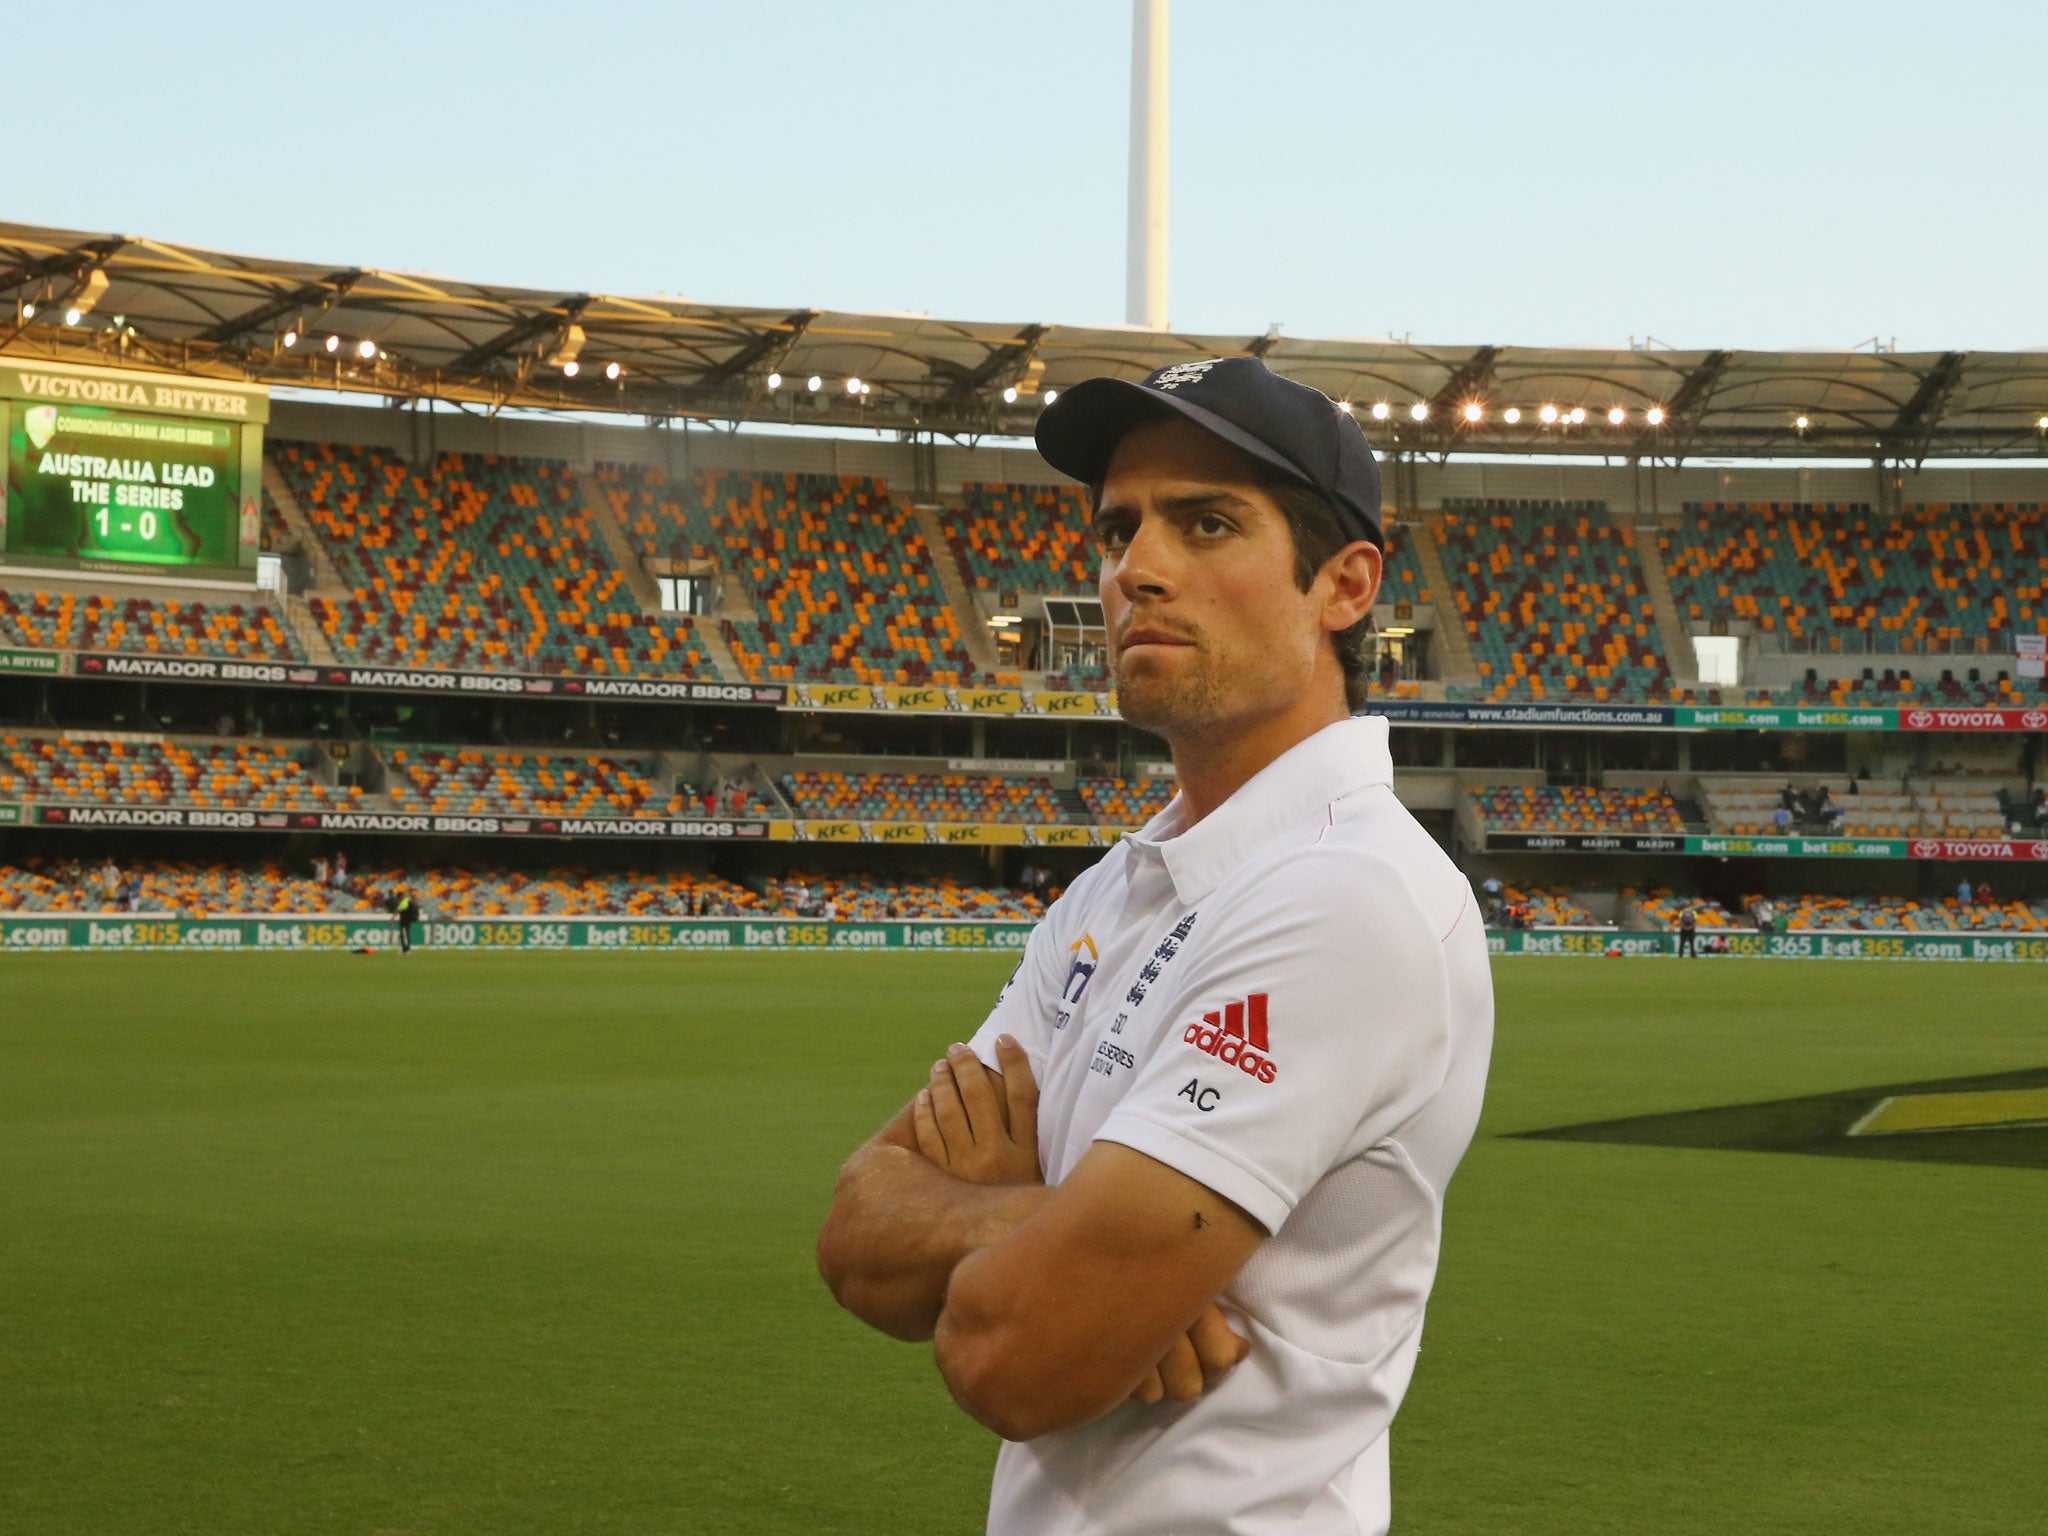 Alastair Cook reflects on England's defeat